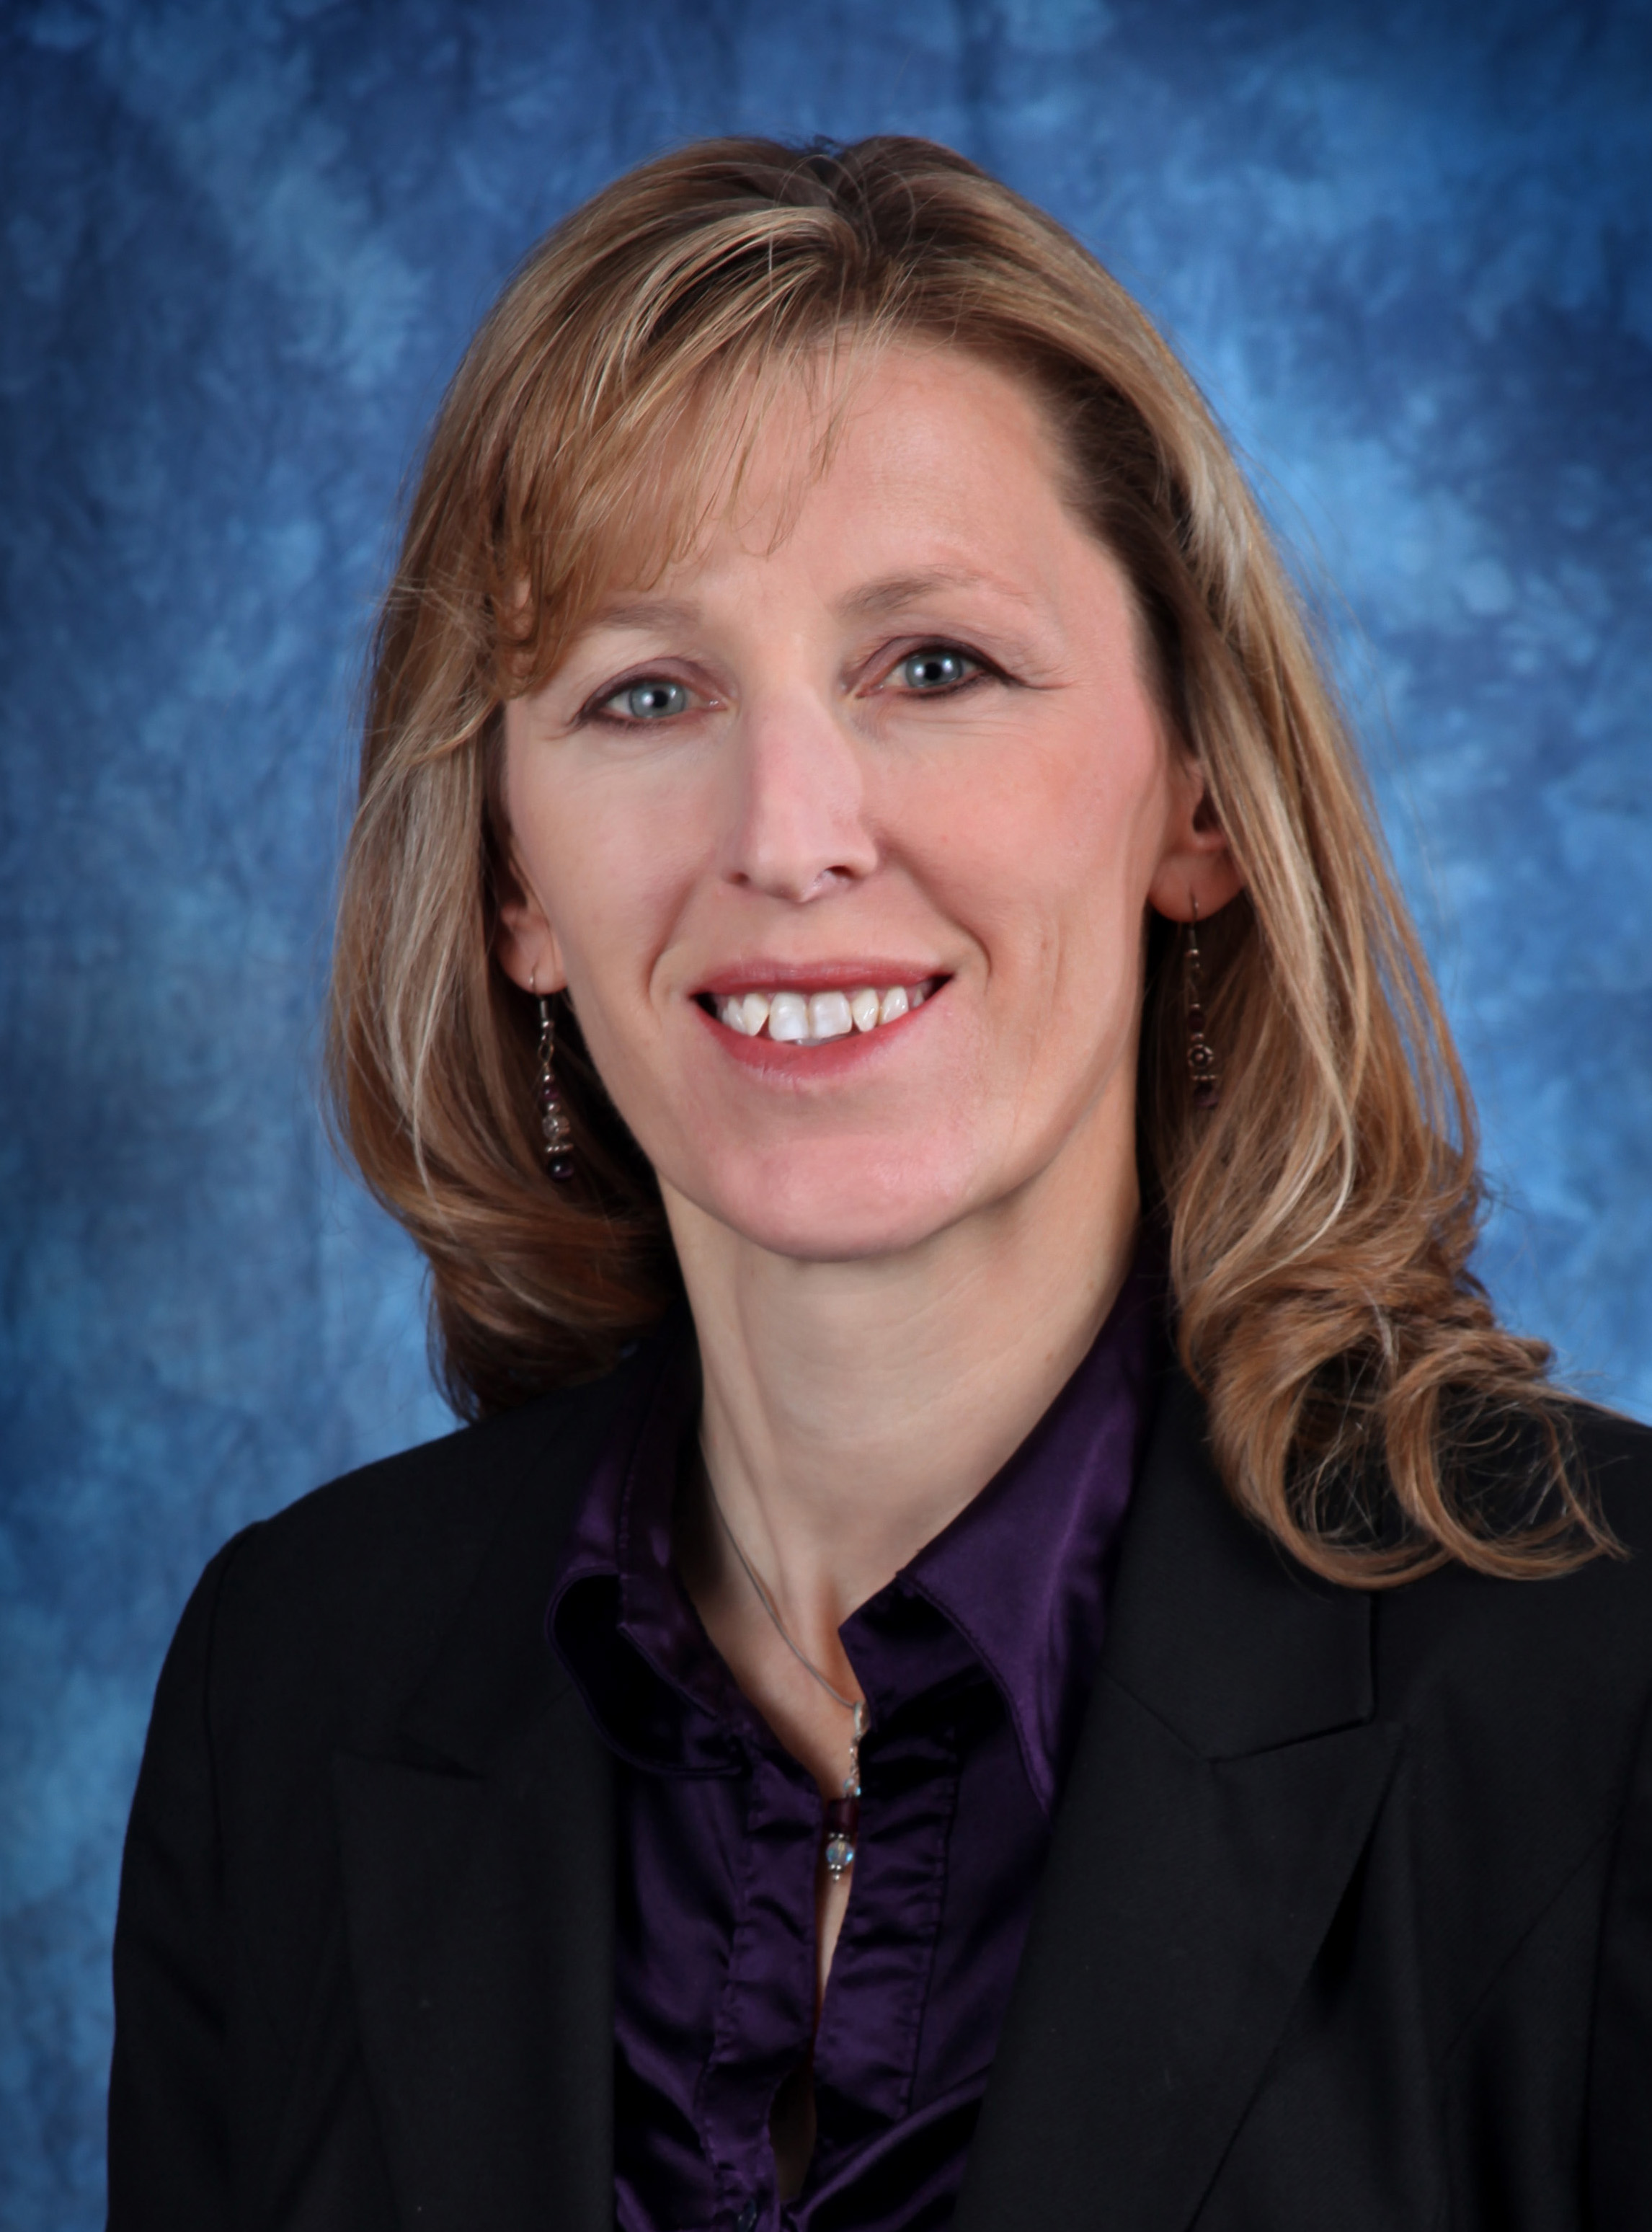 Dr. Rachelle Gorrell, Phelps Health primary care physician